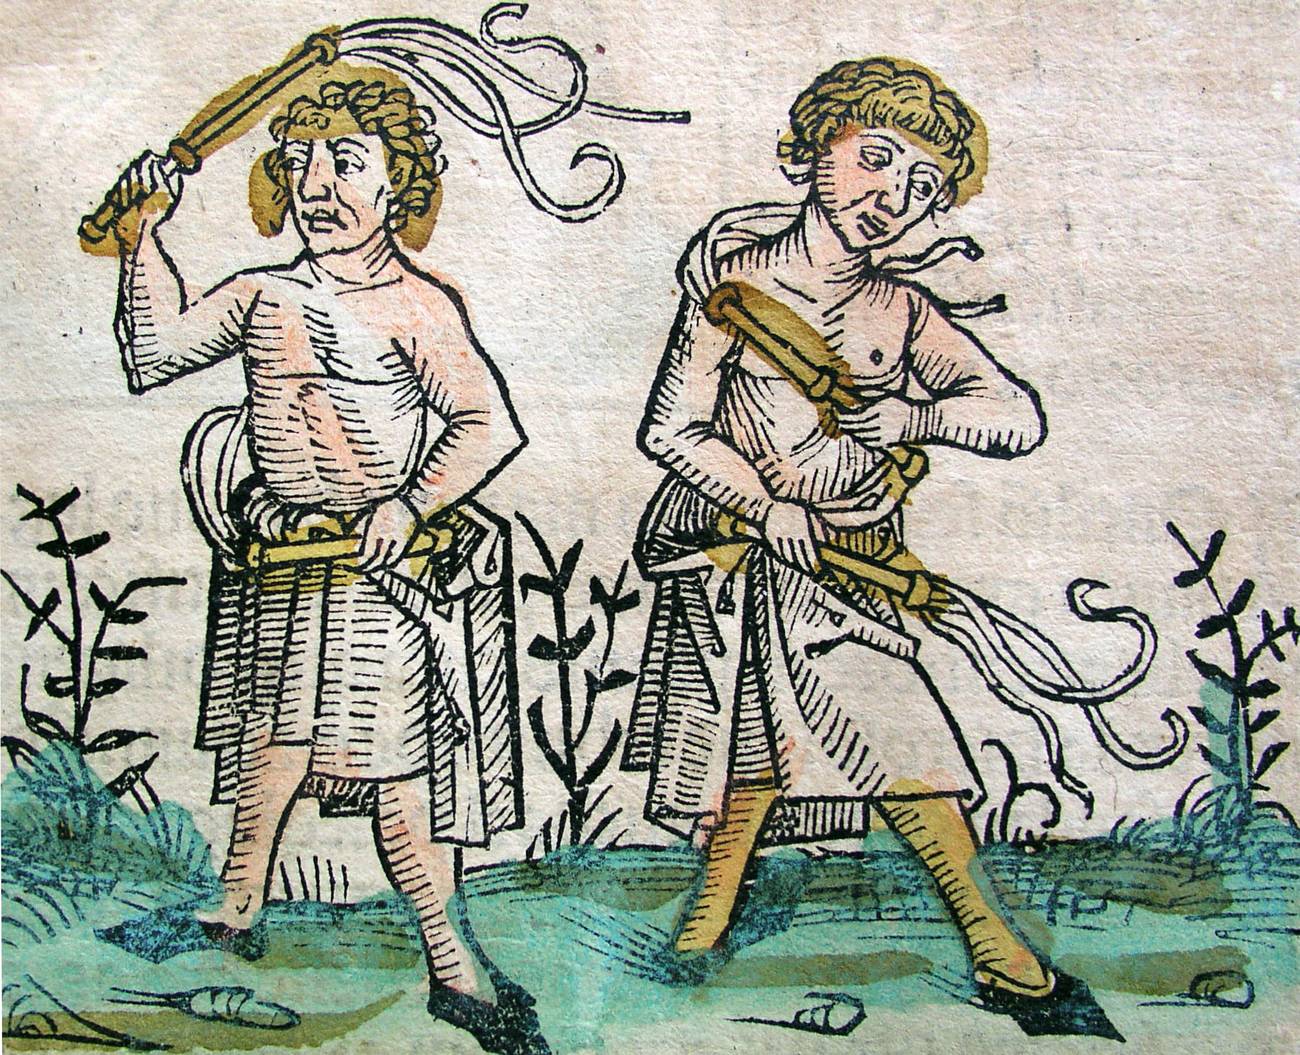 Hartmann Schedel (1440-1514), from the Nuremberg Chronicle/Wikimedia Commons